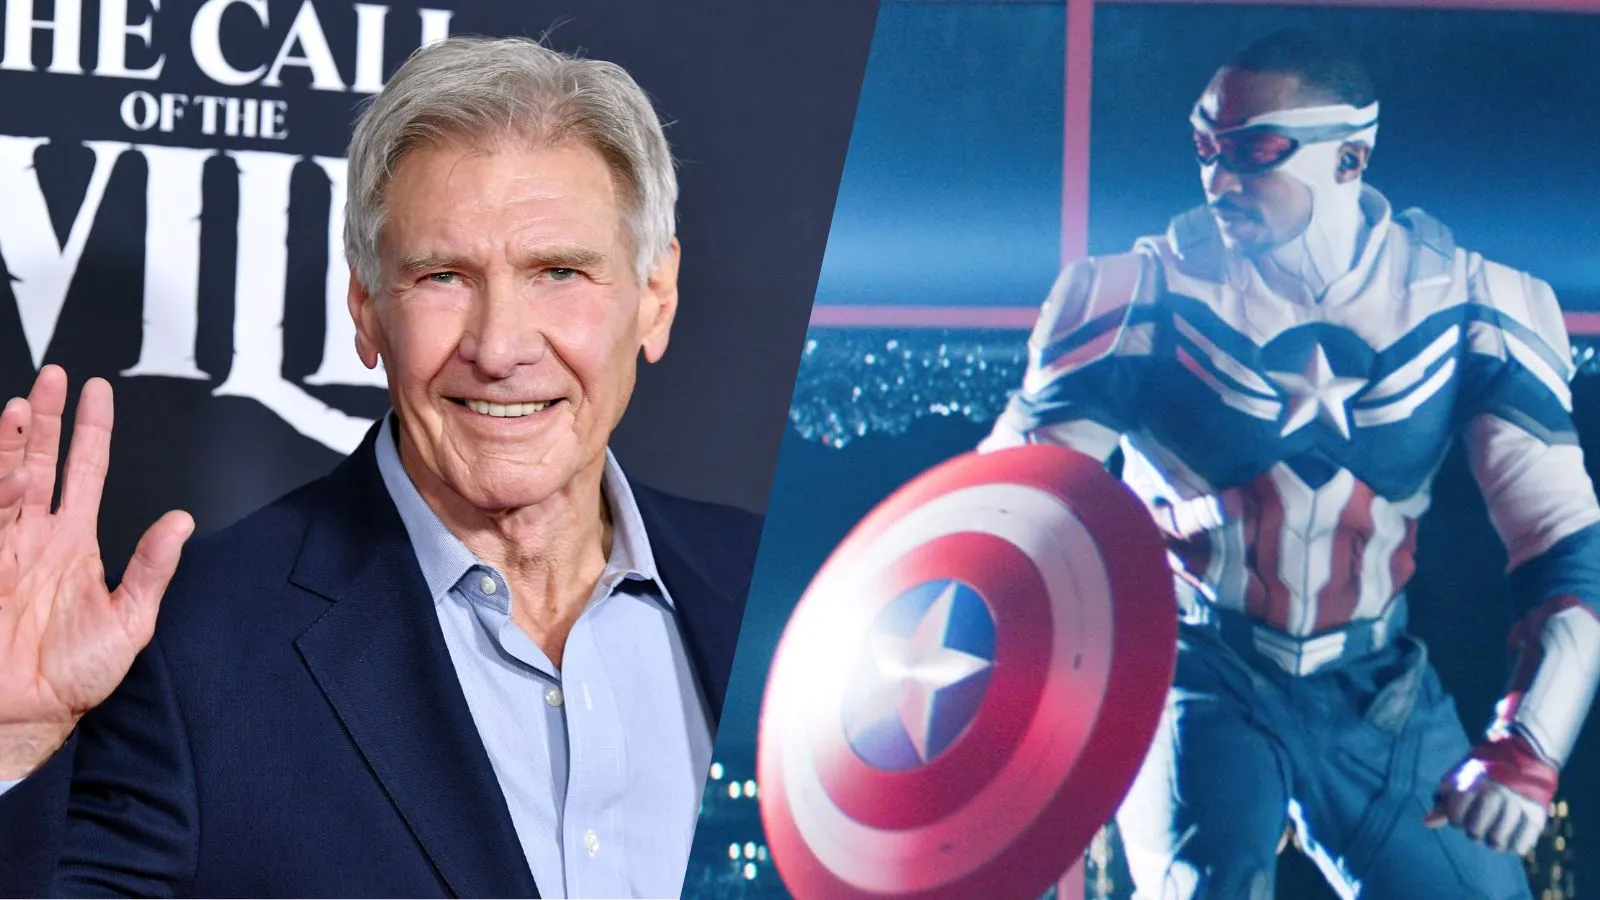 Harrison Ford confirmed to join the MCU in ‘Captain America: New World Order’